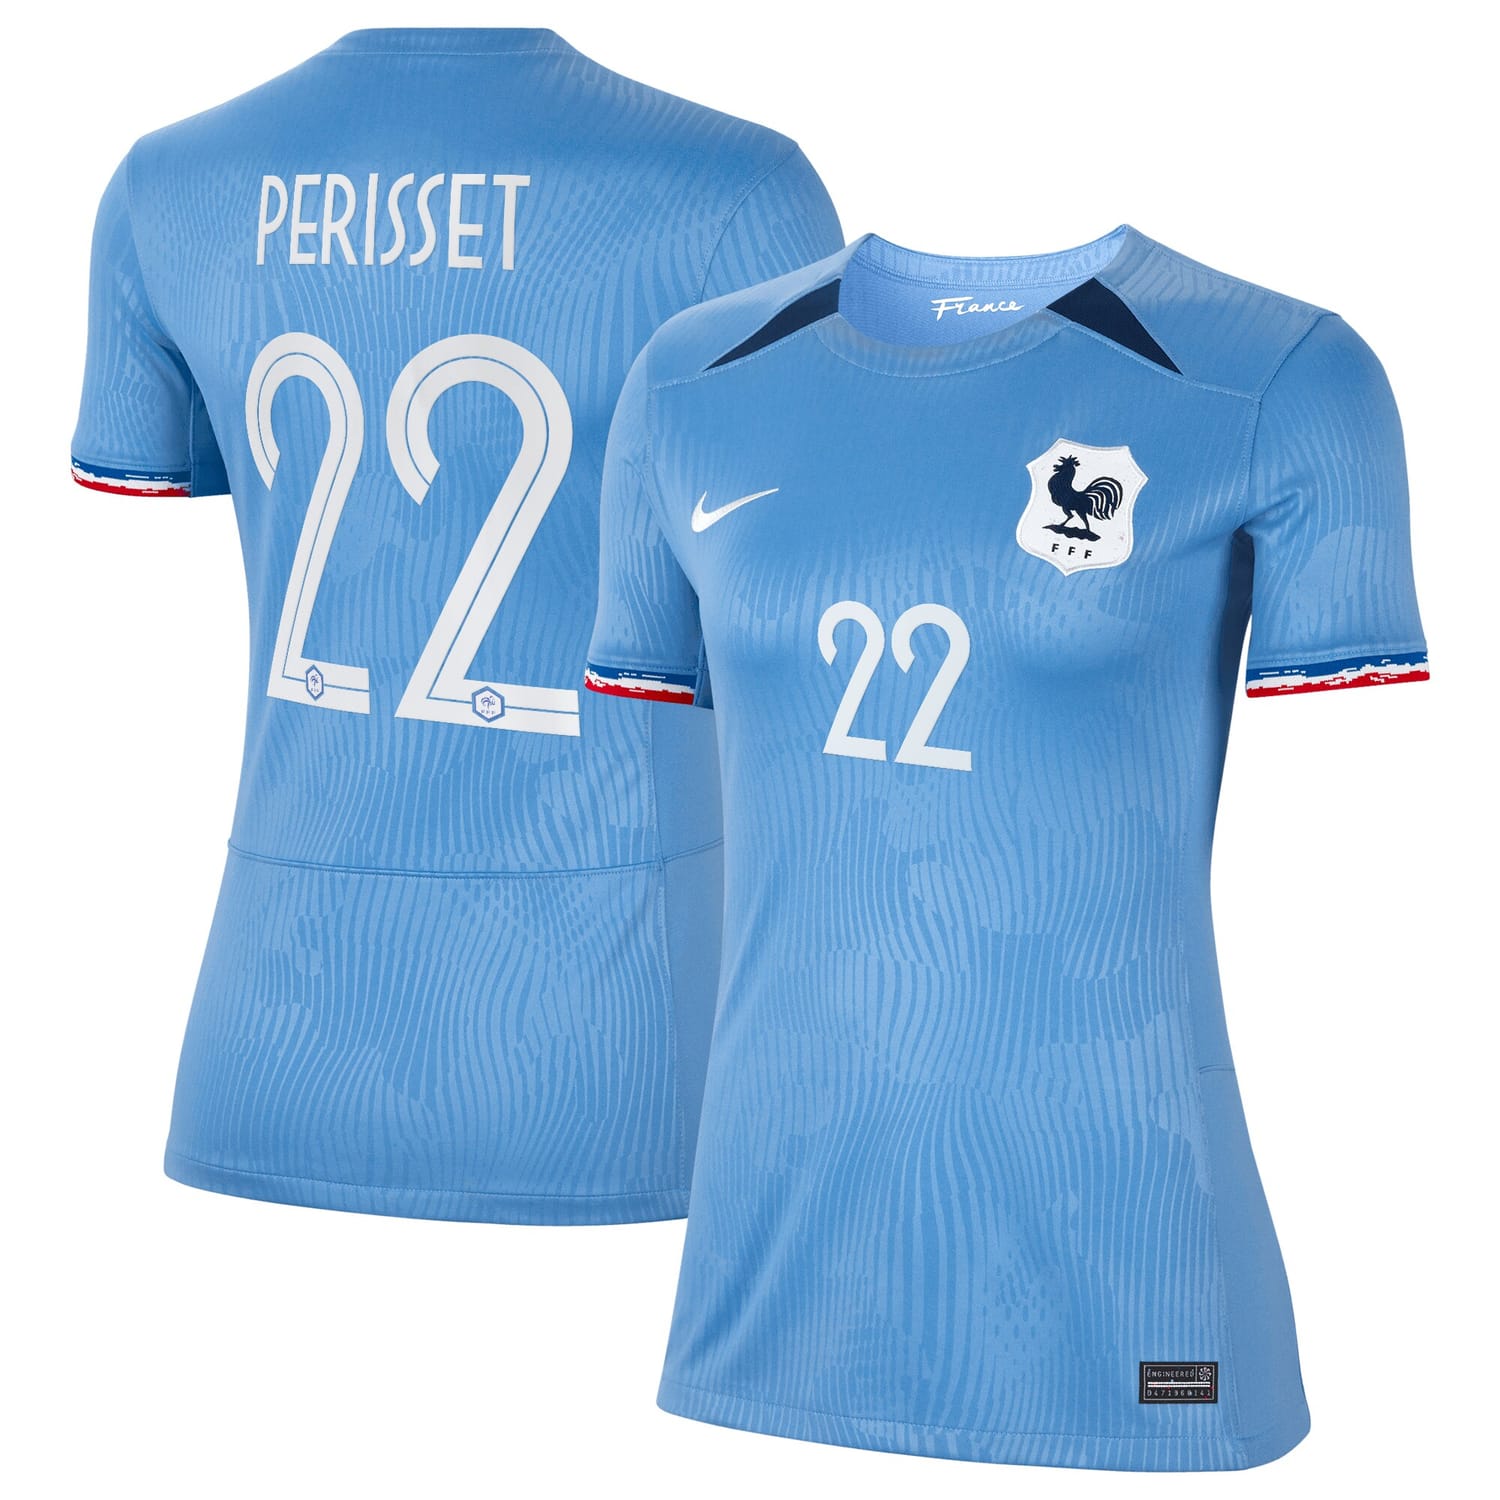 France National Team Home Jersey Shirt 2023-24 player Eve Perisset 22 printing for Women